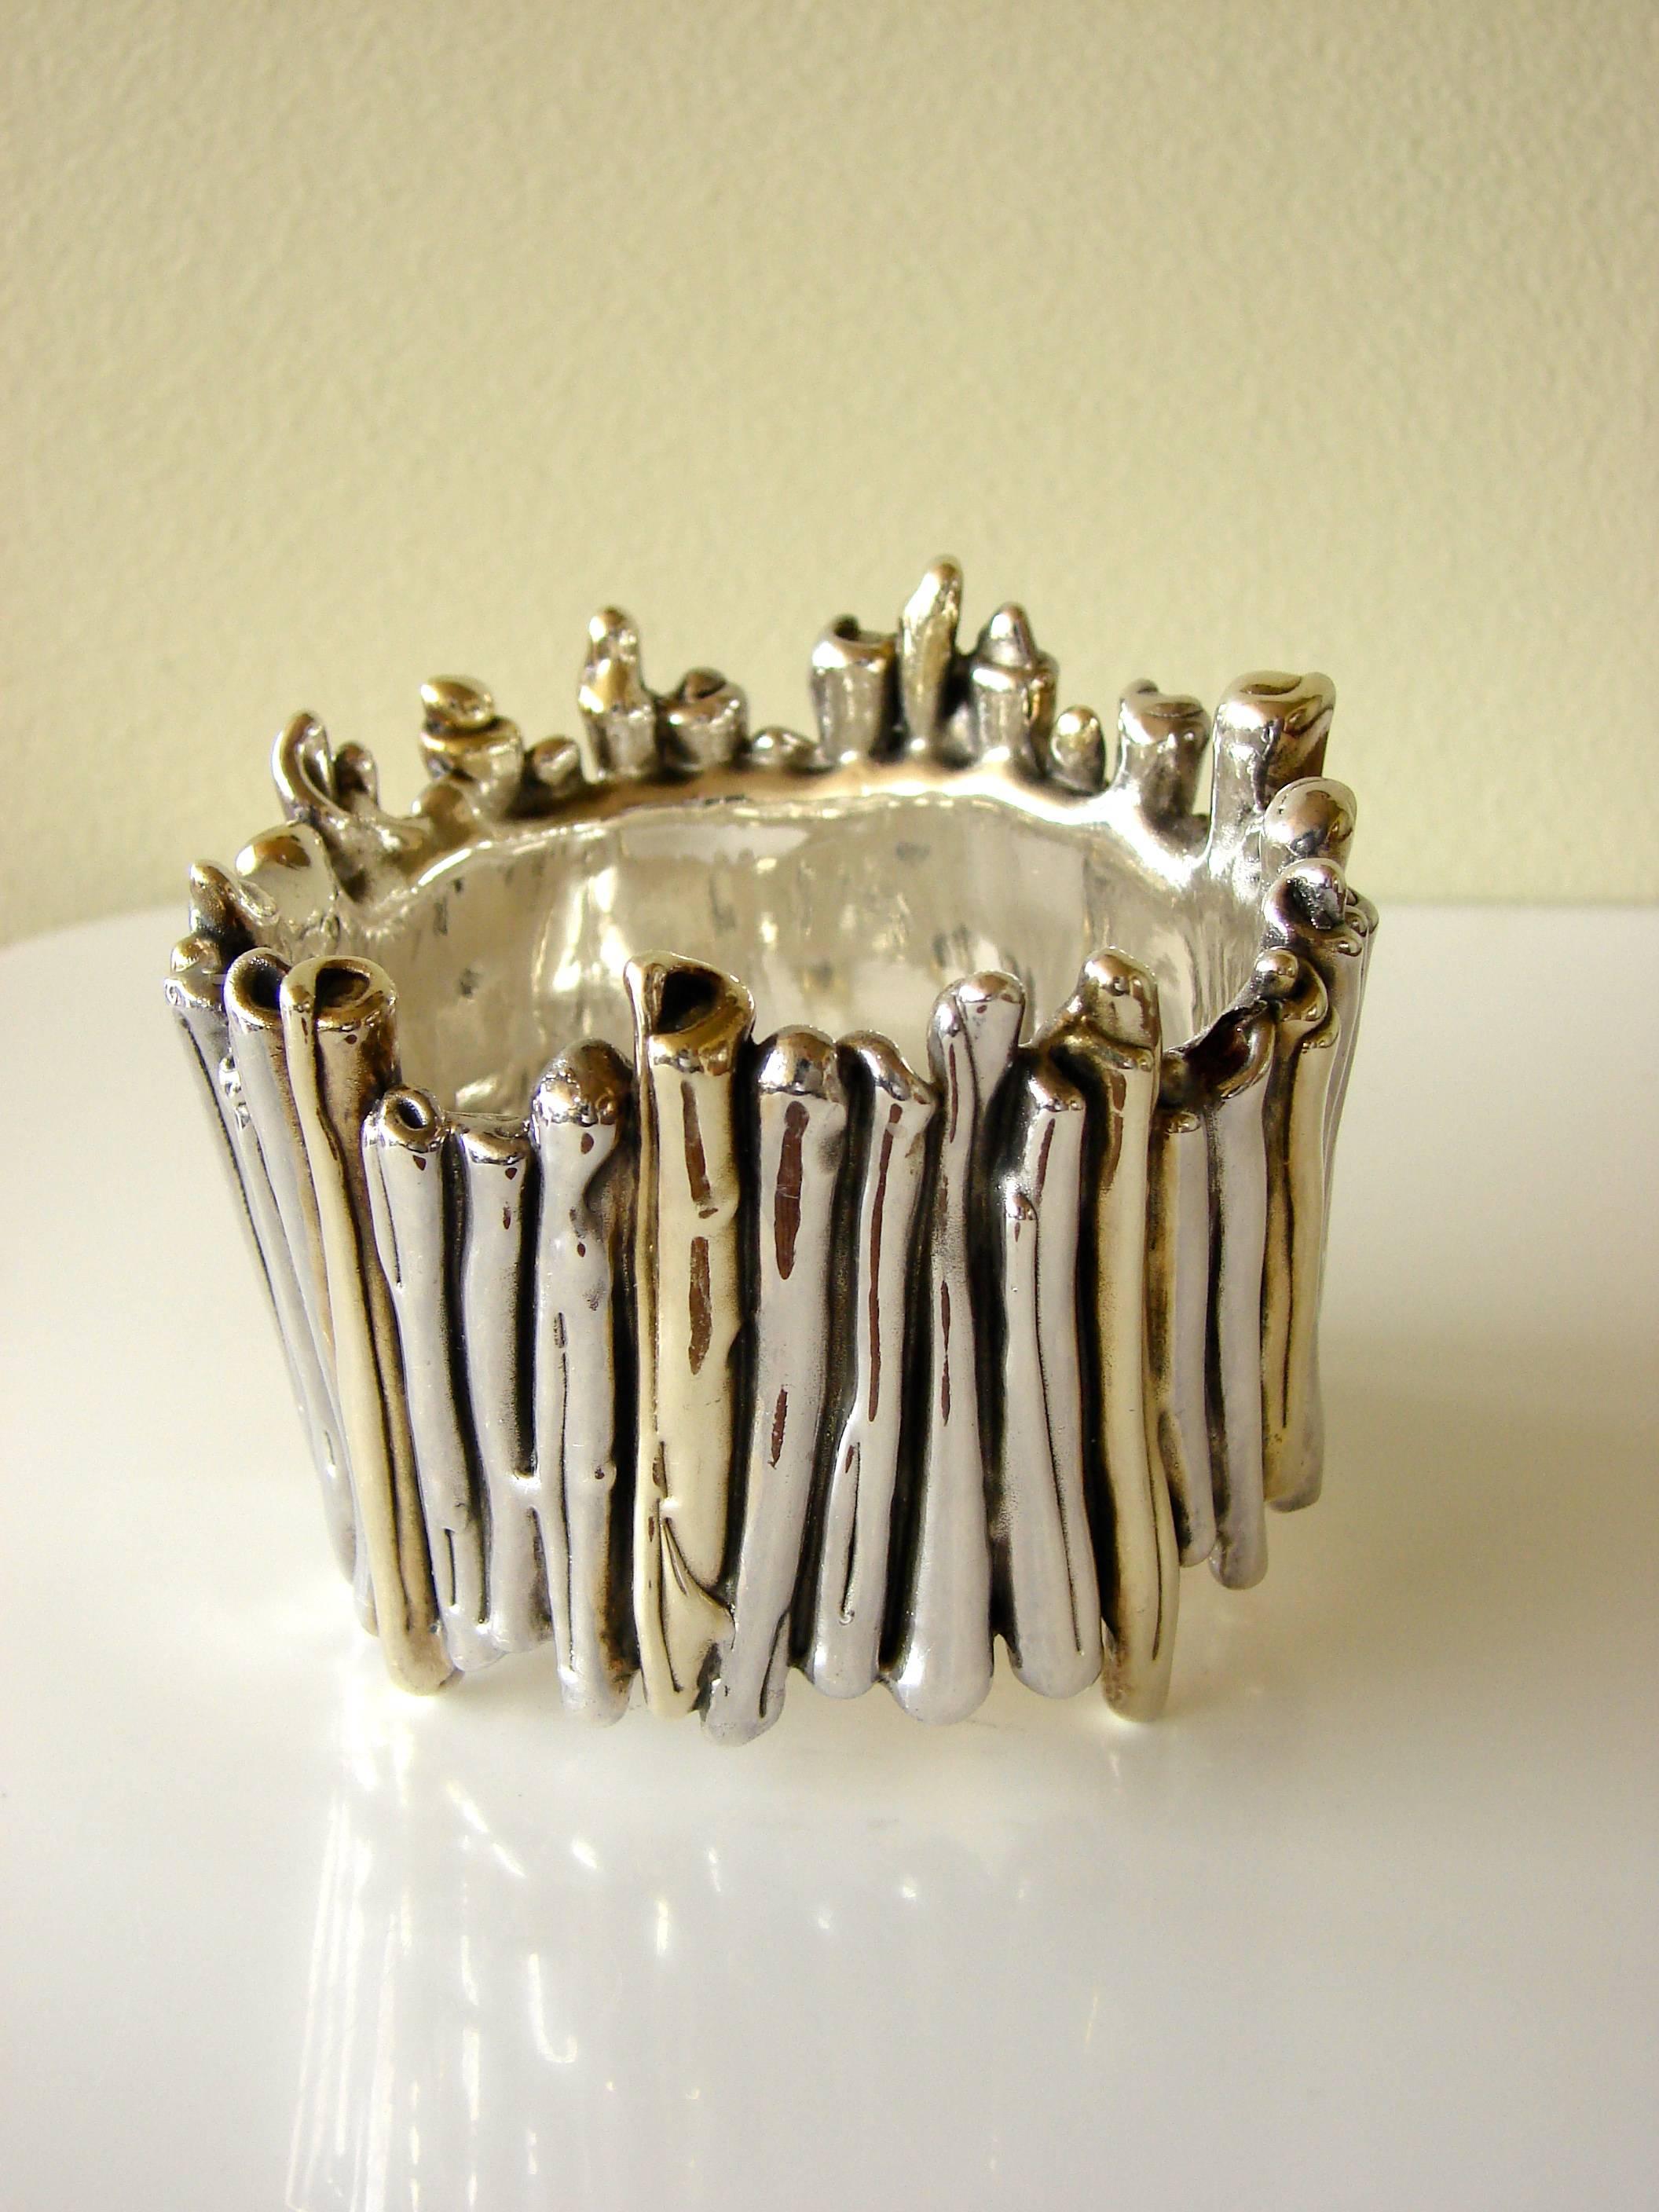 This incredible wide bracelet was designed by David Varsano of Israel in the late 1970s.  Made from sterling silver and gold metal using an electroform technique, this piece weighs approximately 95.4 grams, making it lightweight for wear.  It